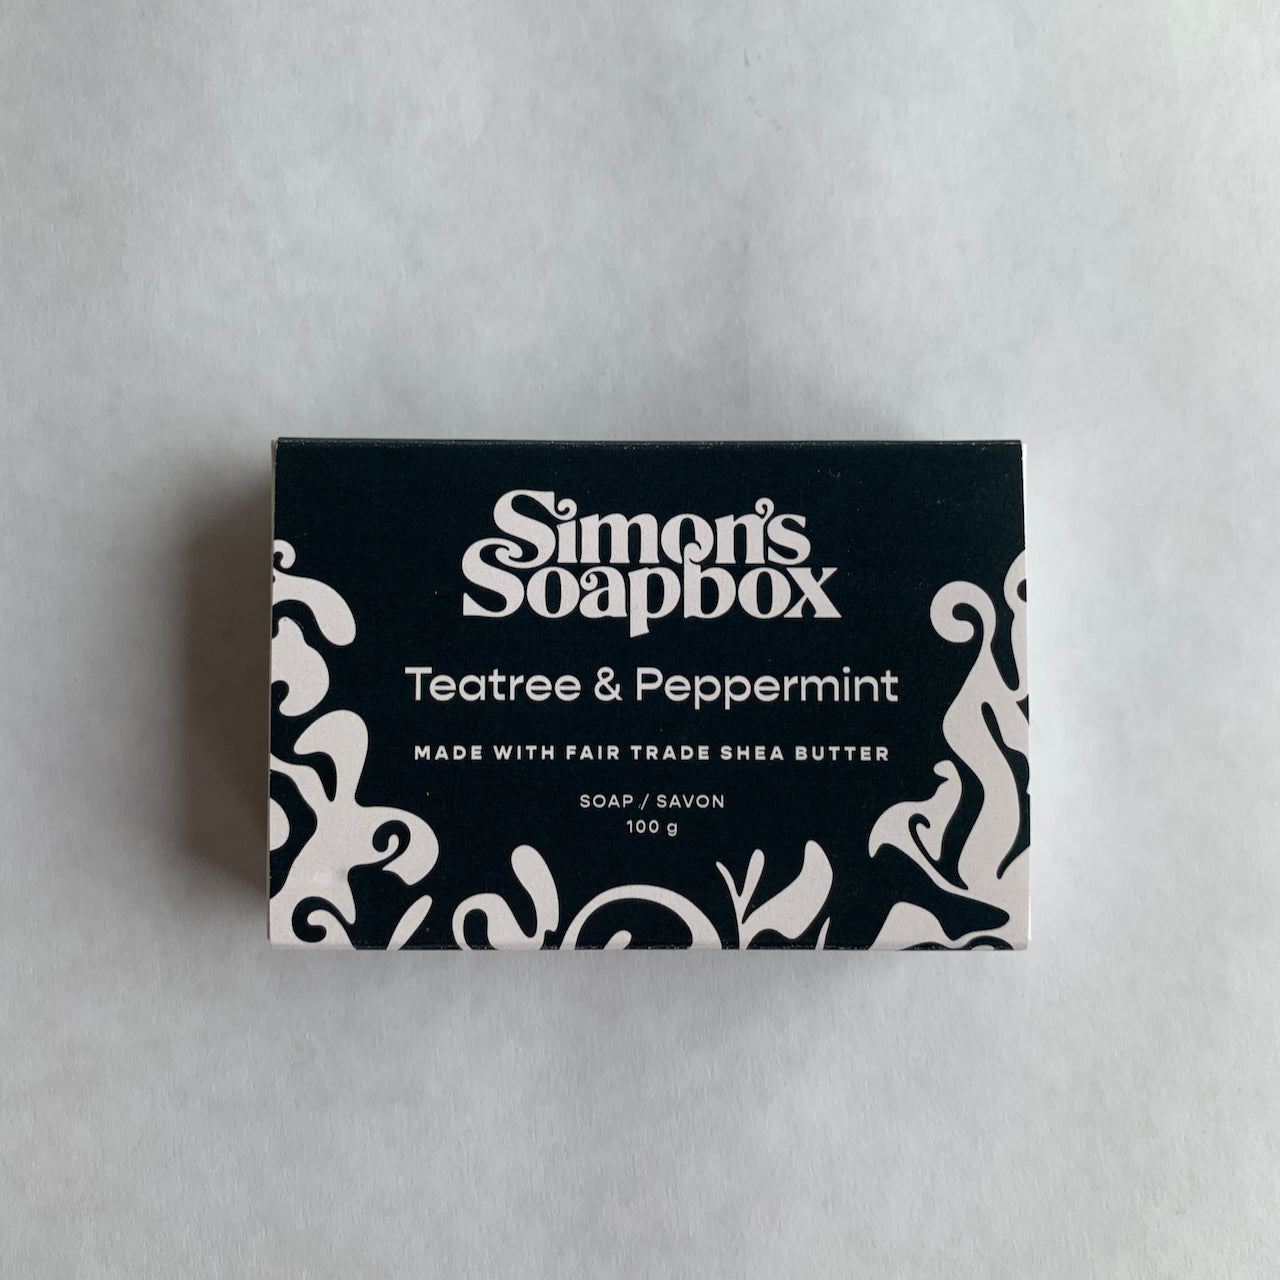 rectangle package black with white swirl design and text Simon's Soapbox Tea Tree and Peppermint made with fair trade shea butter soap/savon 100 g